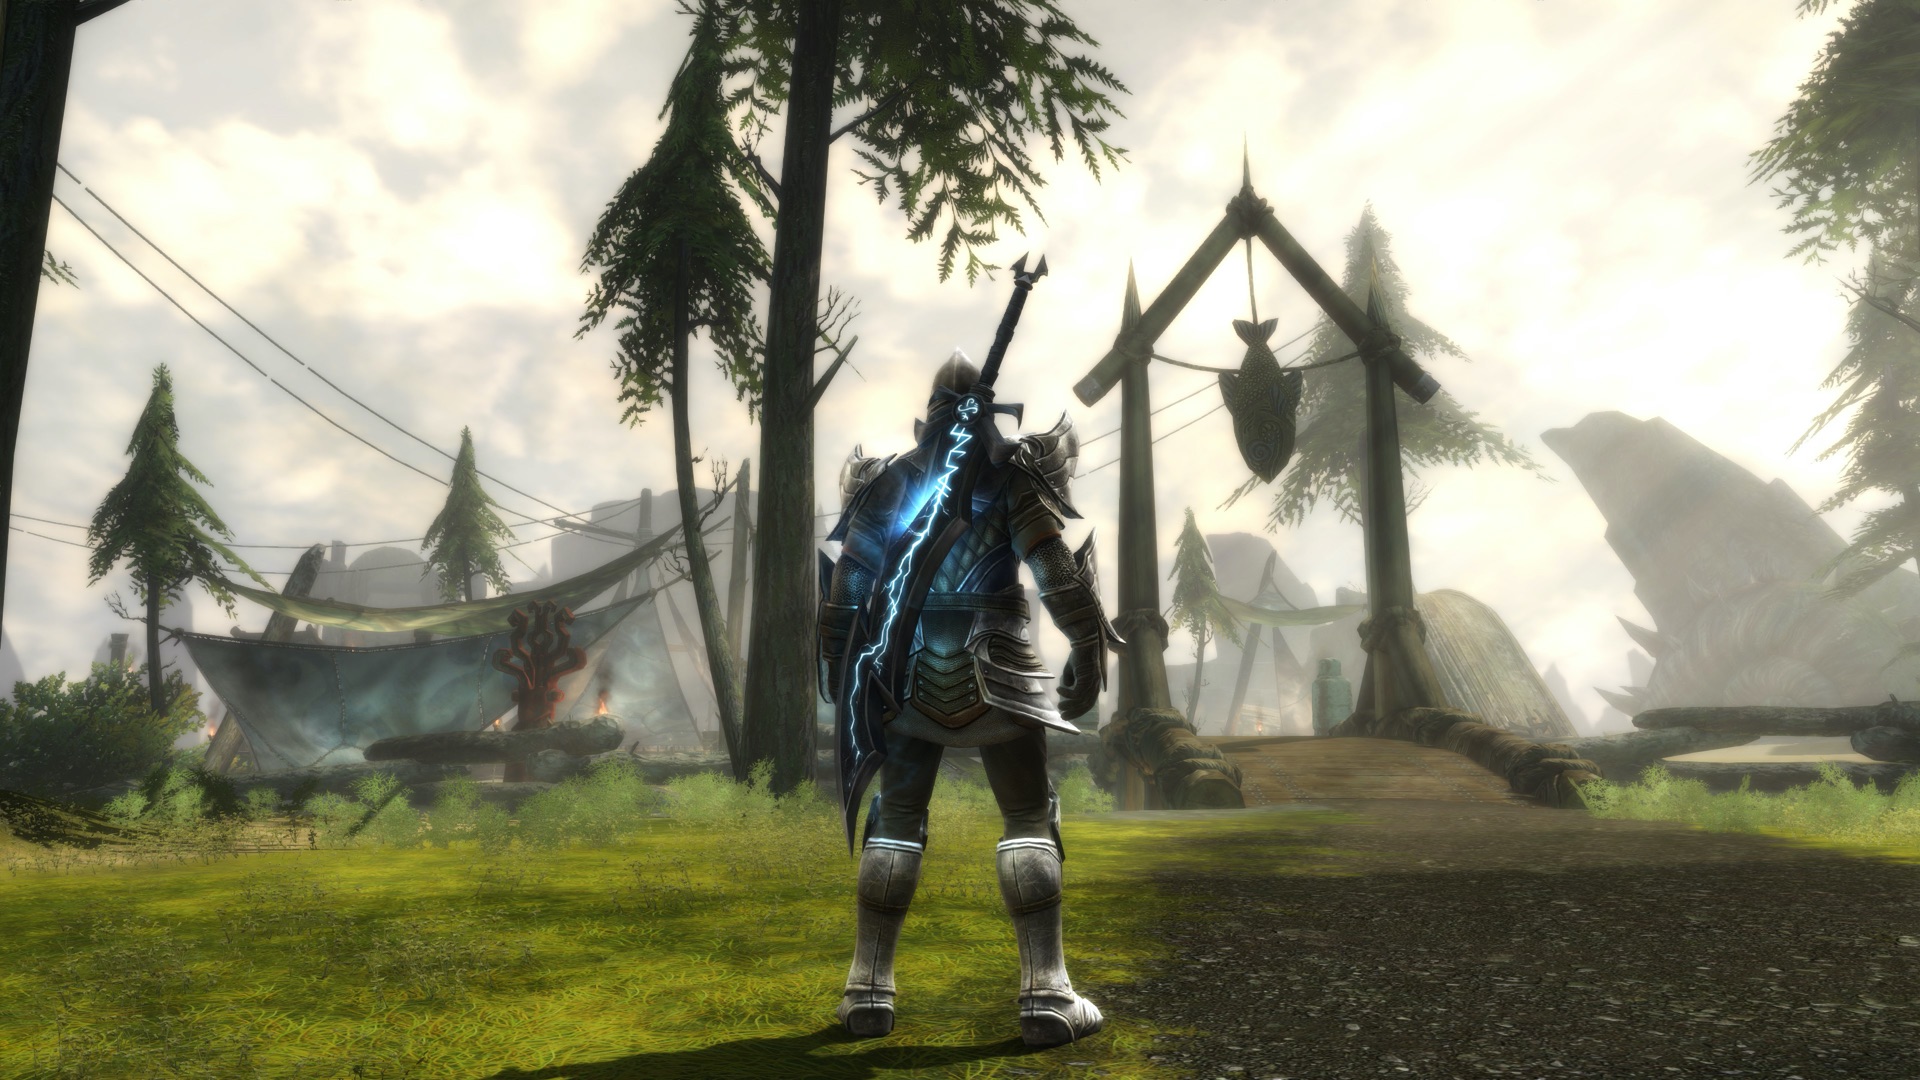 Exploring the realm in Kingdoms of Amalur: Re-Reckoning.